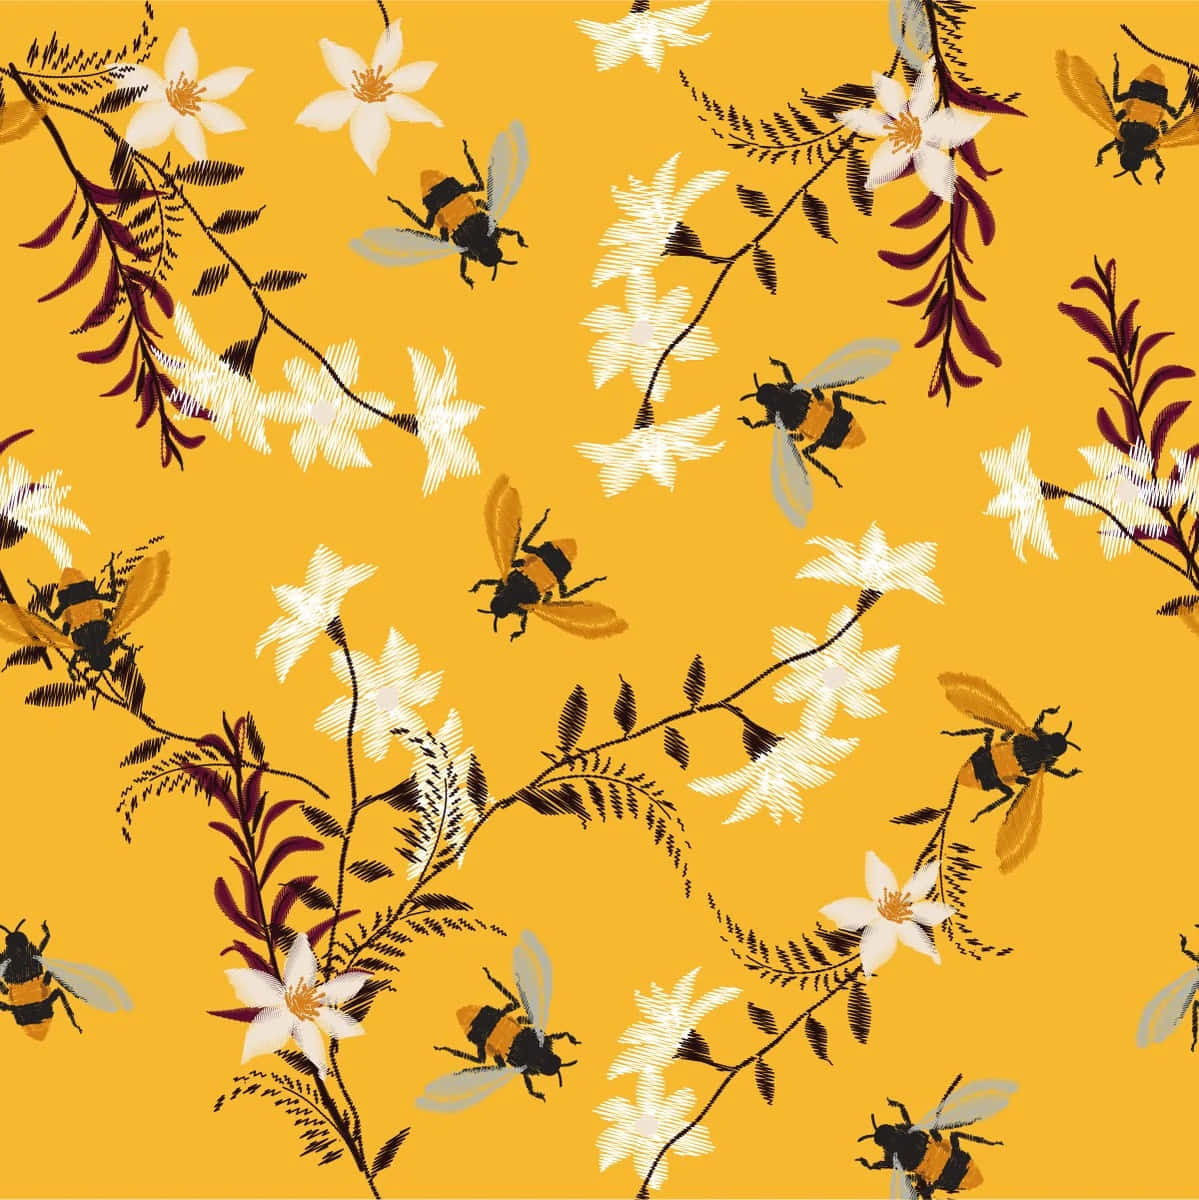 Vintage Floral Bee Pattern Yellow Background Wallpaper